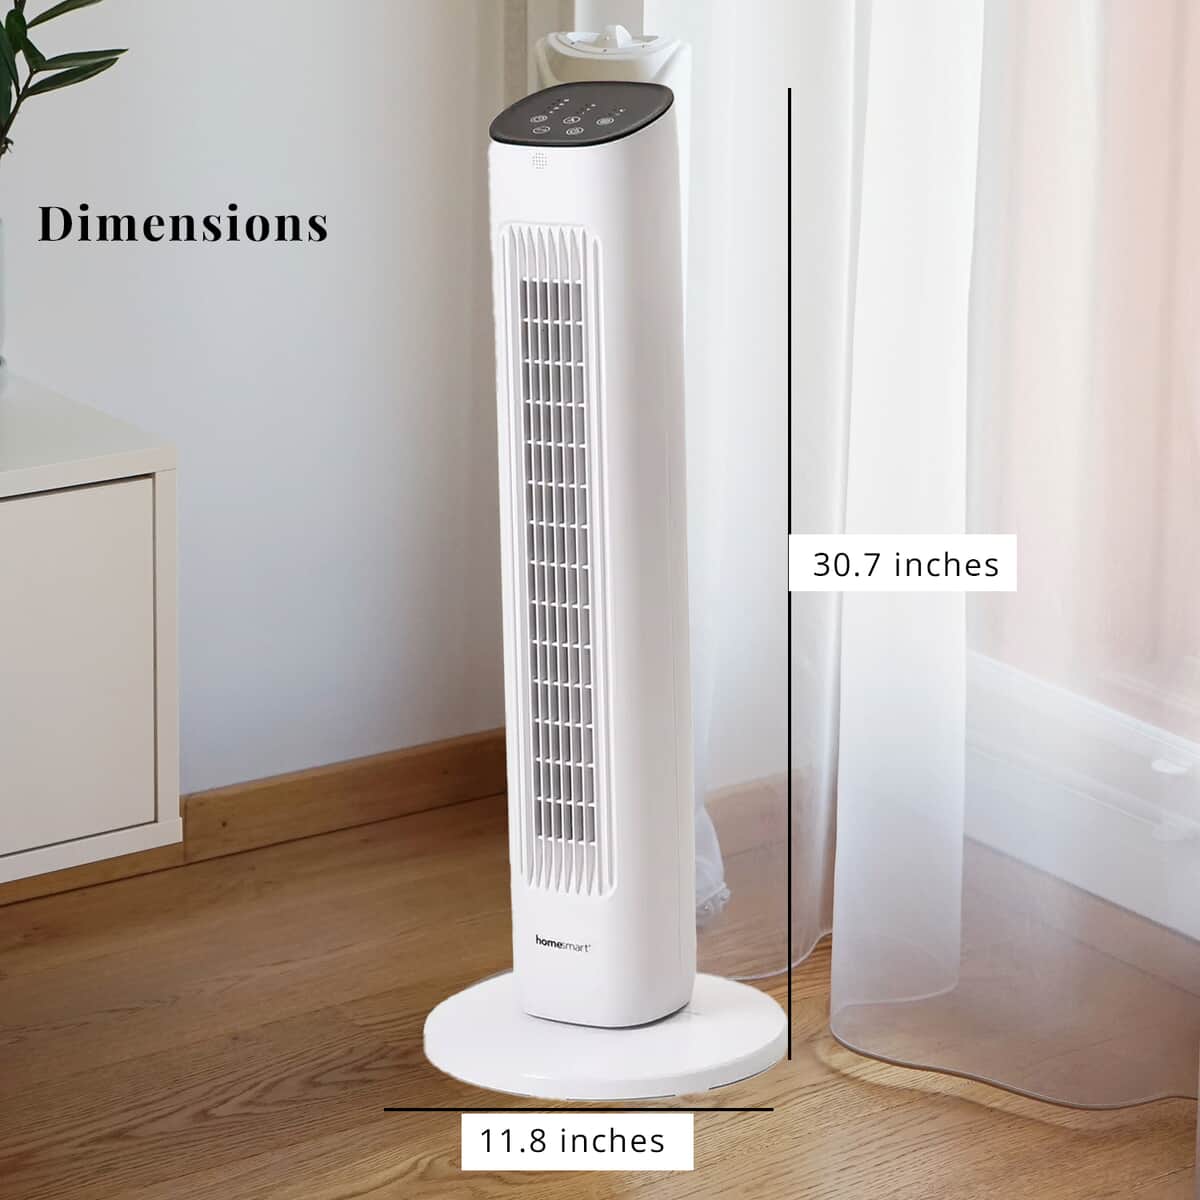 Homesmart Remote Control Tower Fan with Copper Motor in 2 Modes & 3 Speed - White image number 5